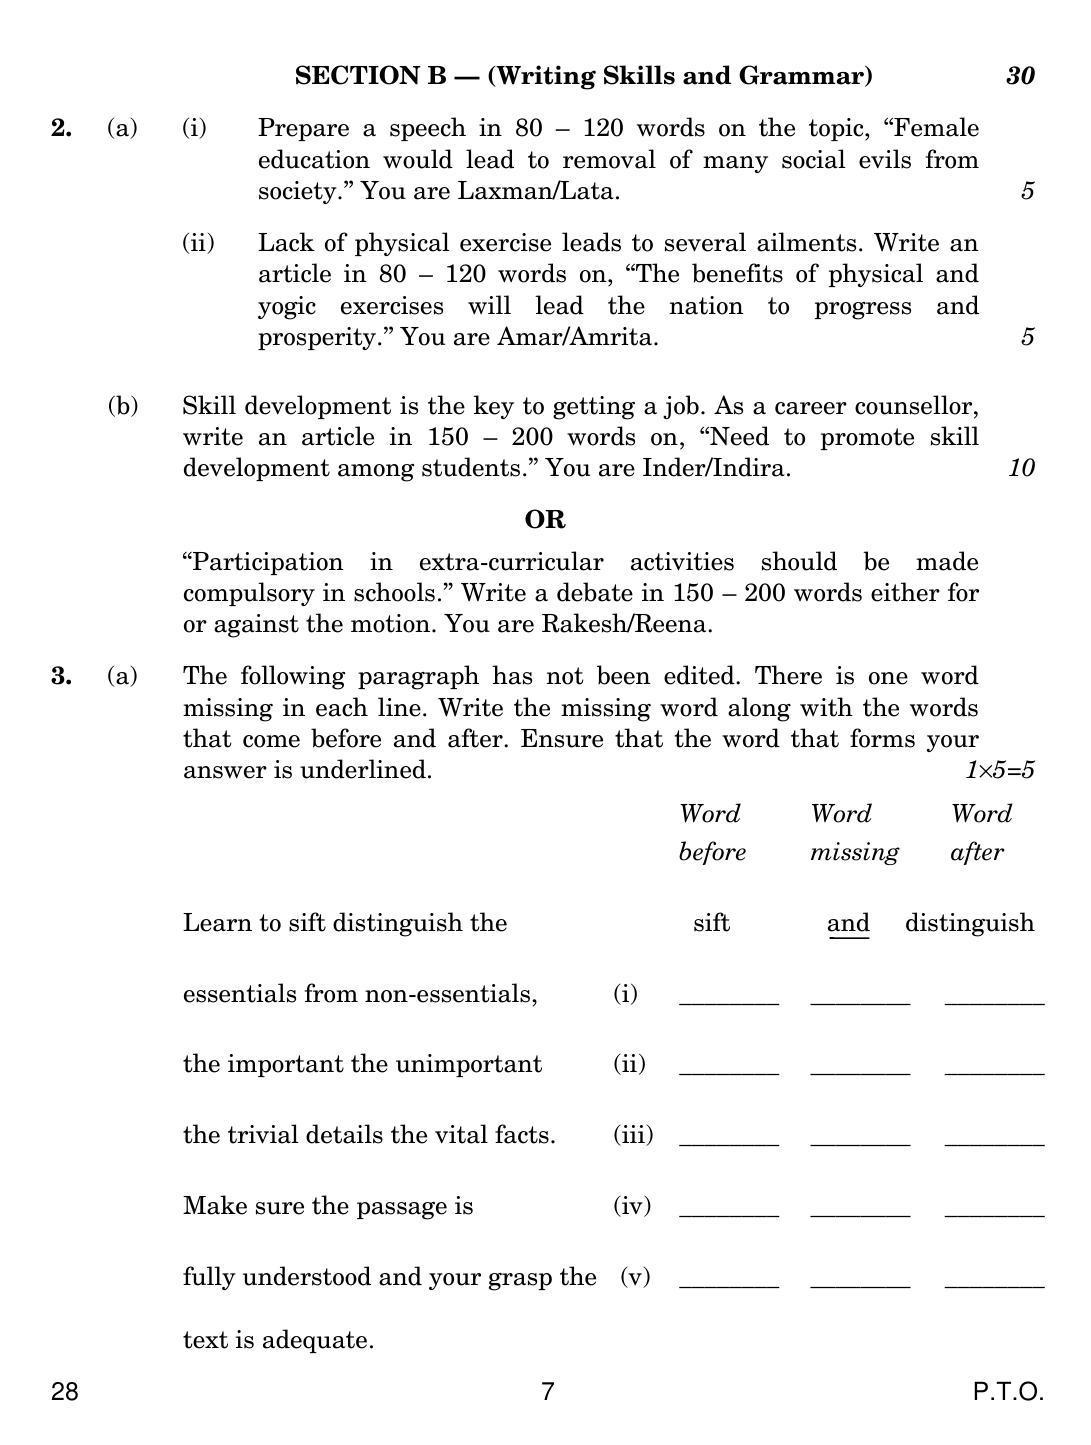 CBSE Class 12 28 ENGLISH ELECTIVE NCERT 2018 Question Paper - Page 7